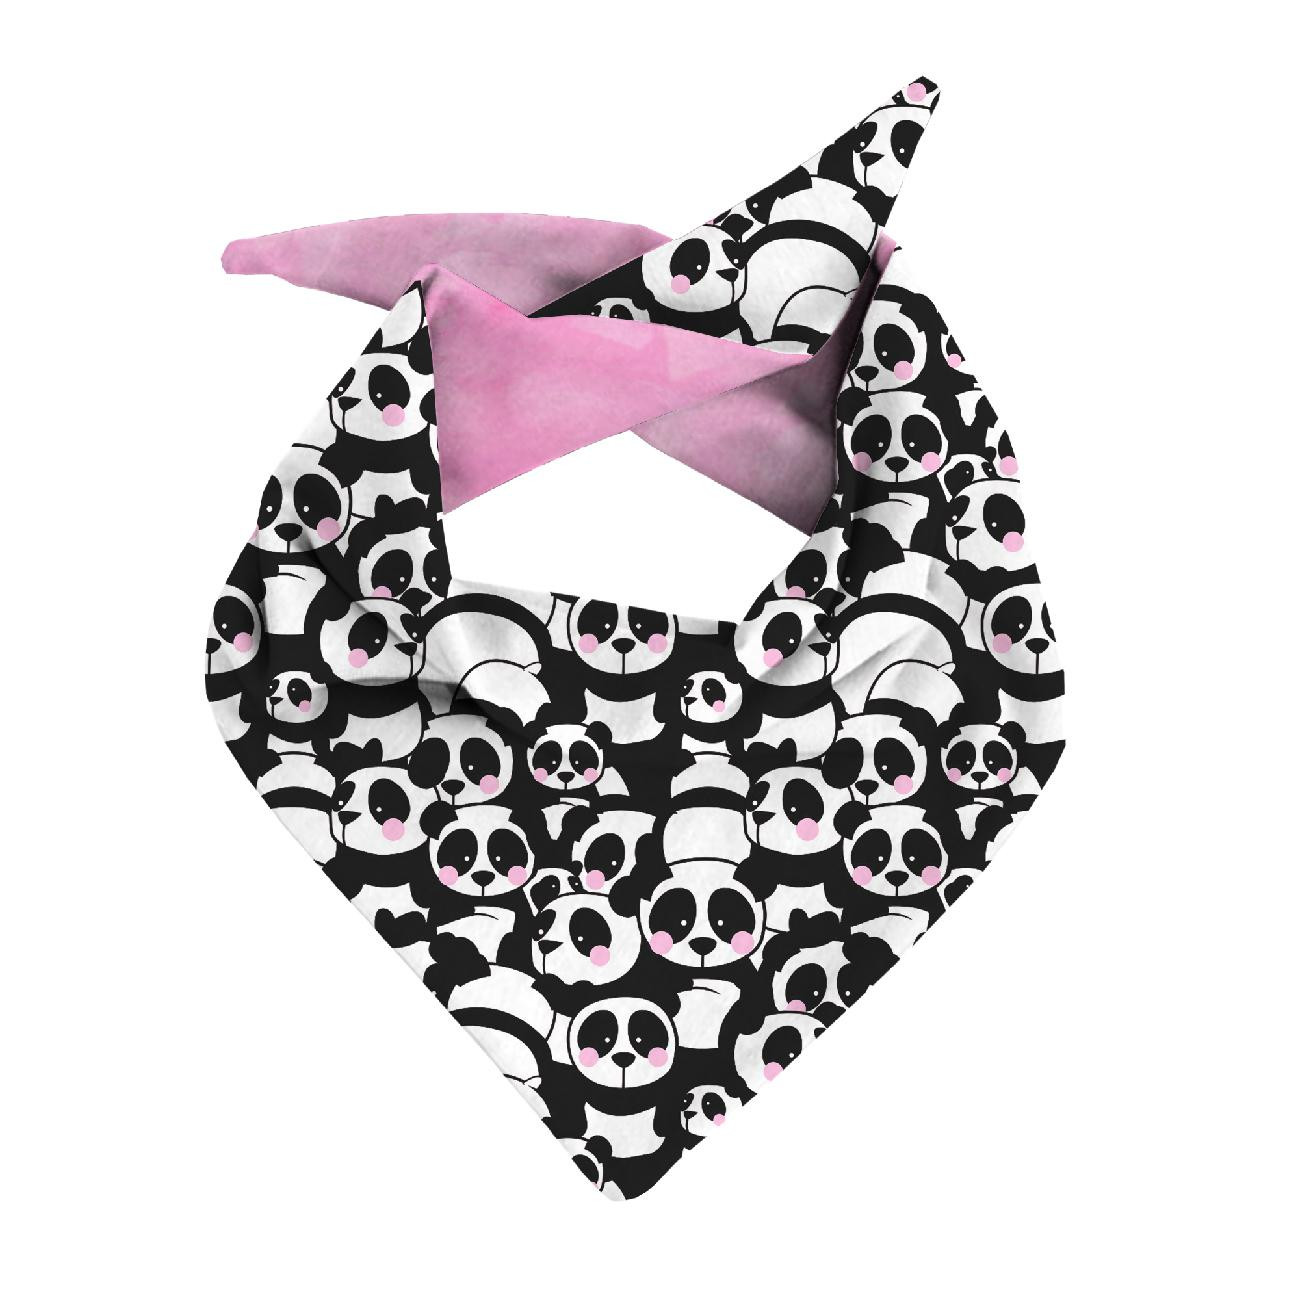 KID'S CAP AND SCARF (MOUSE) - PANDAS / pink - sewing set